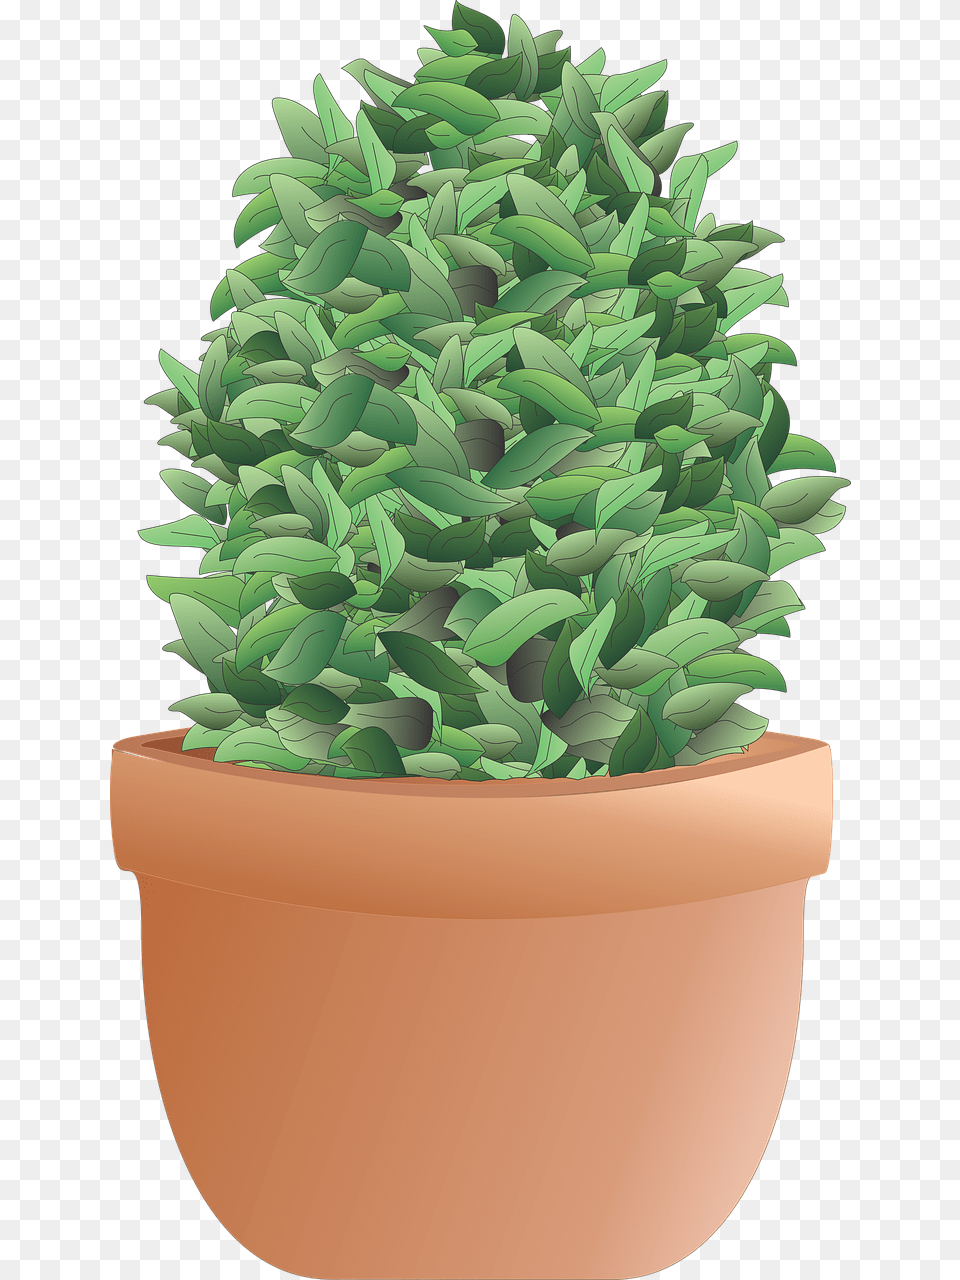 Flowerpot, Vase, Tree, Pottery, Potted Plant Png Image